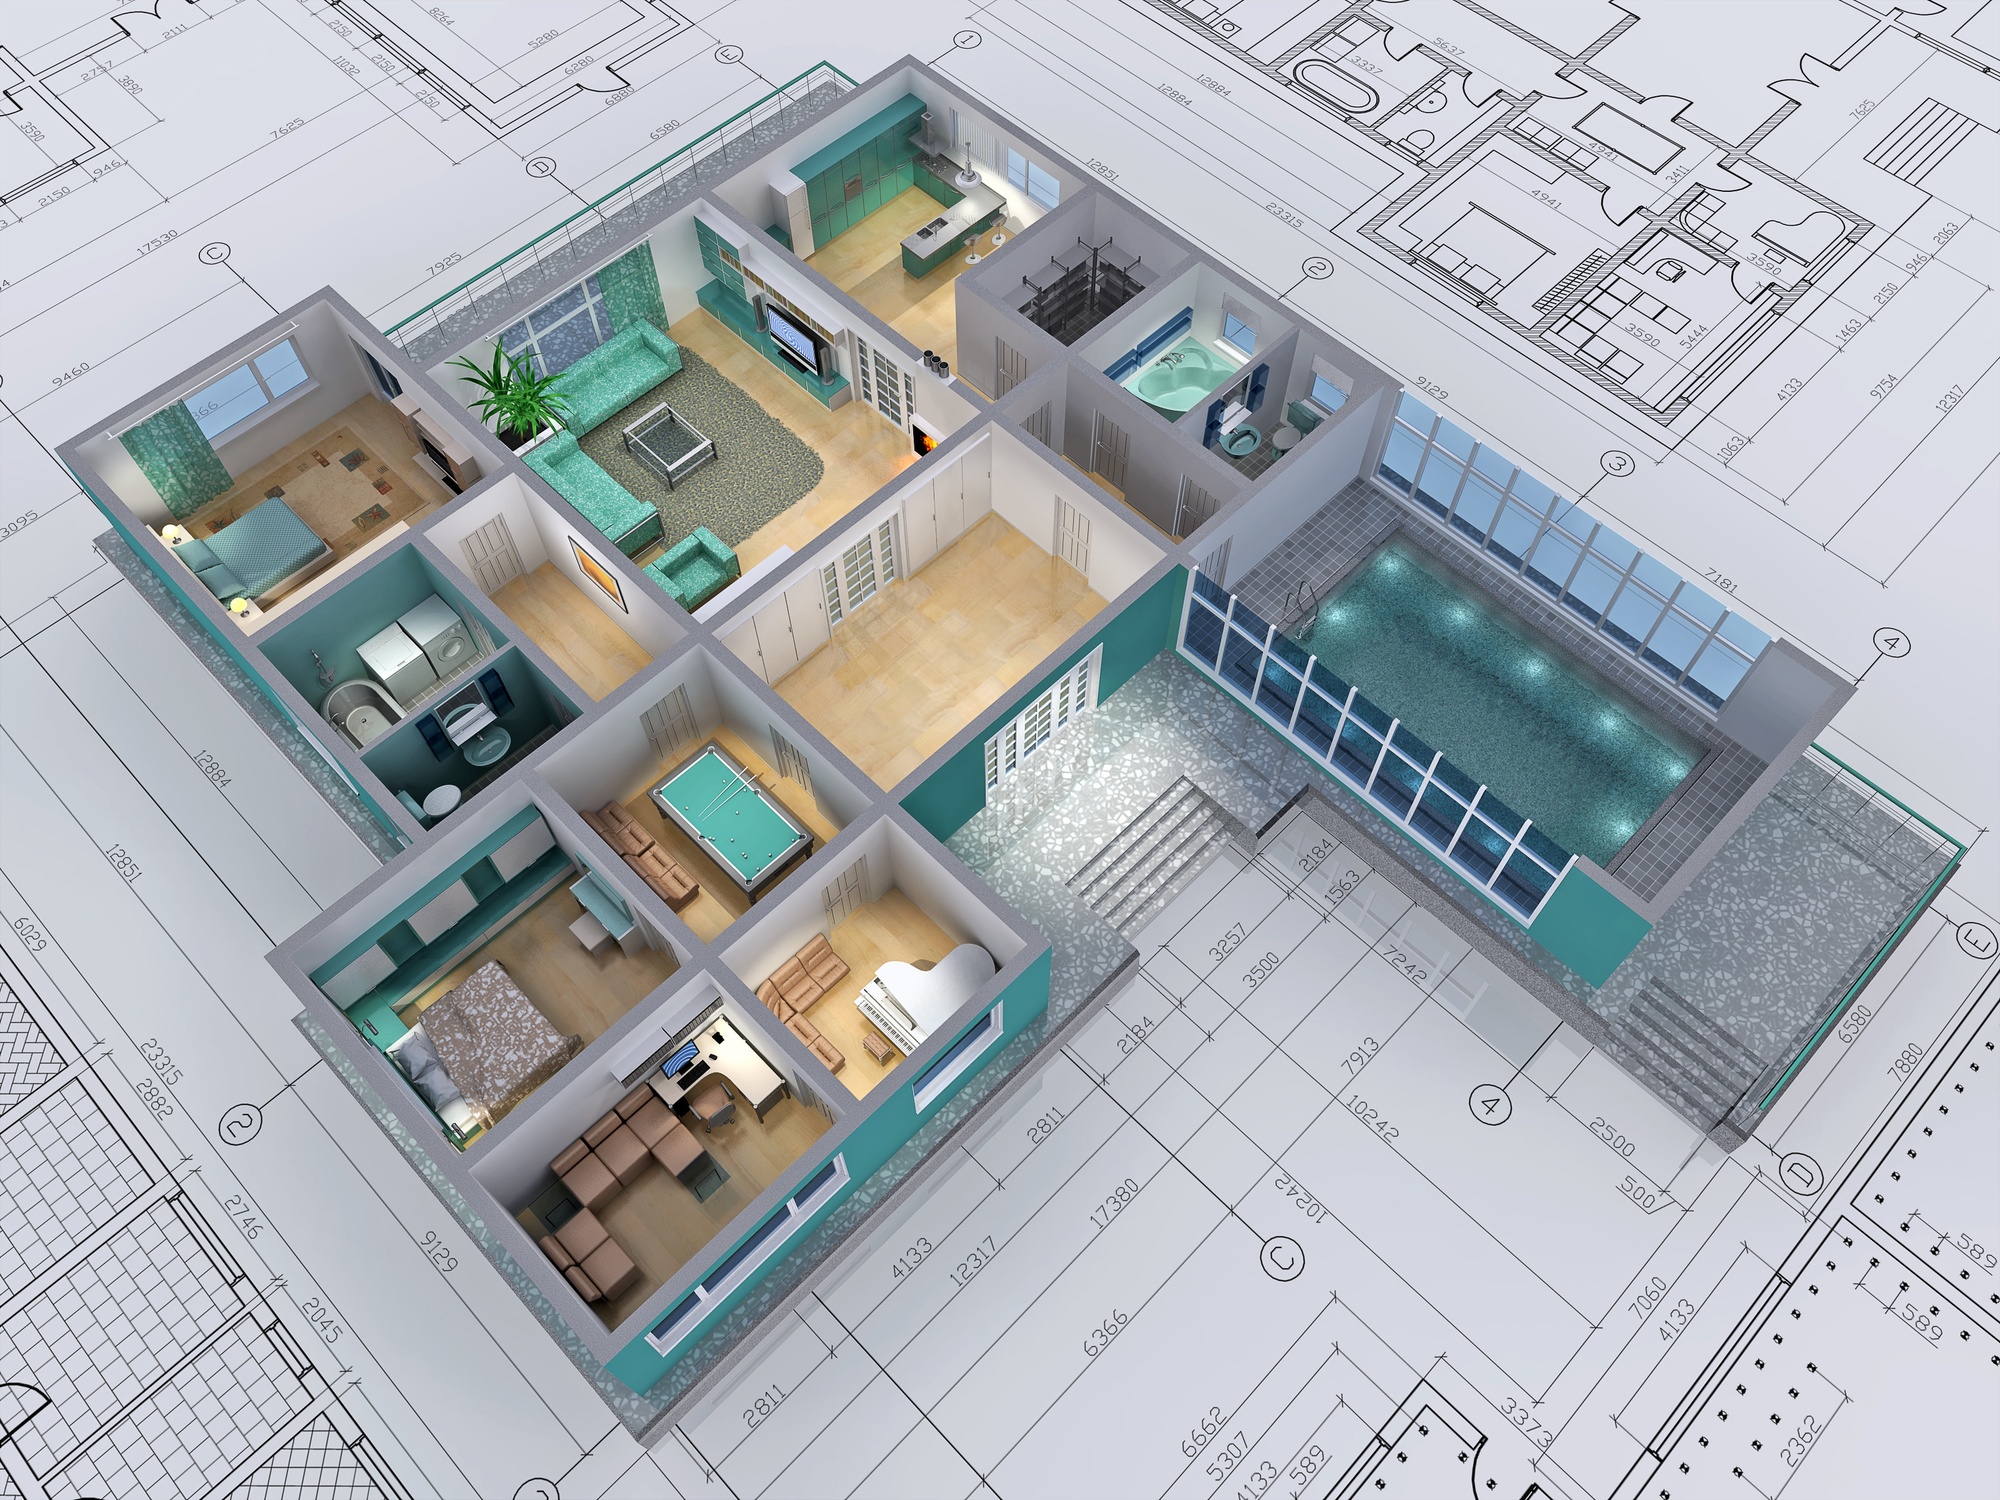 3D architectural rendering services